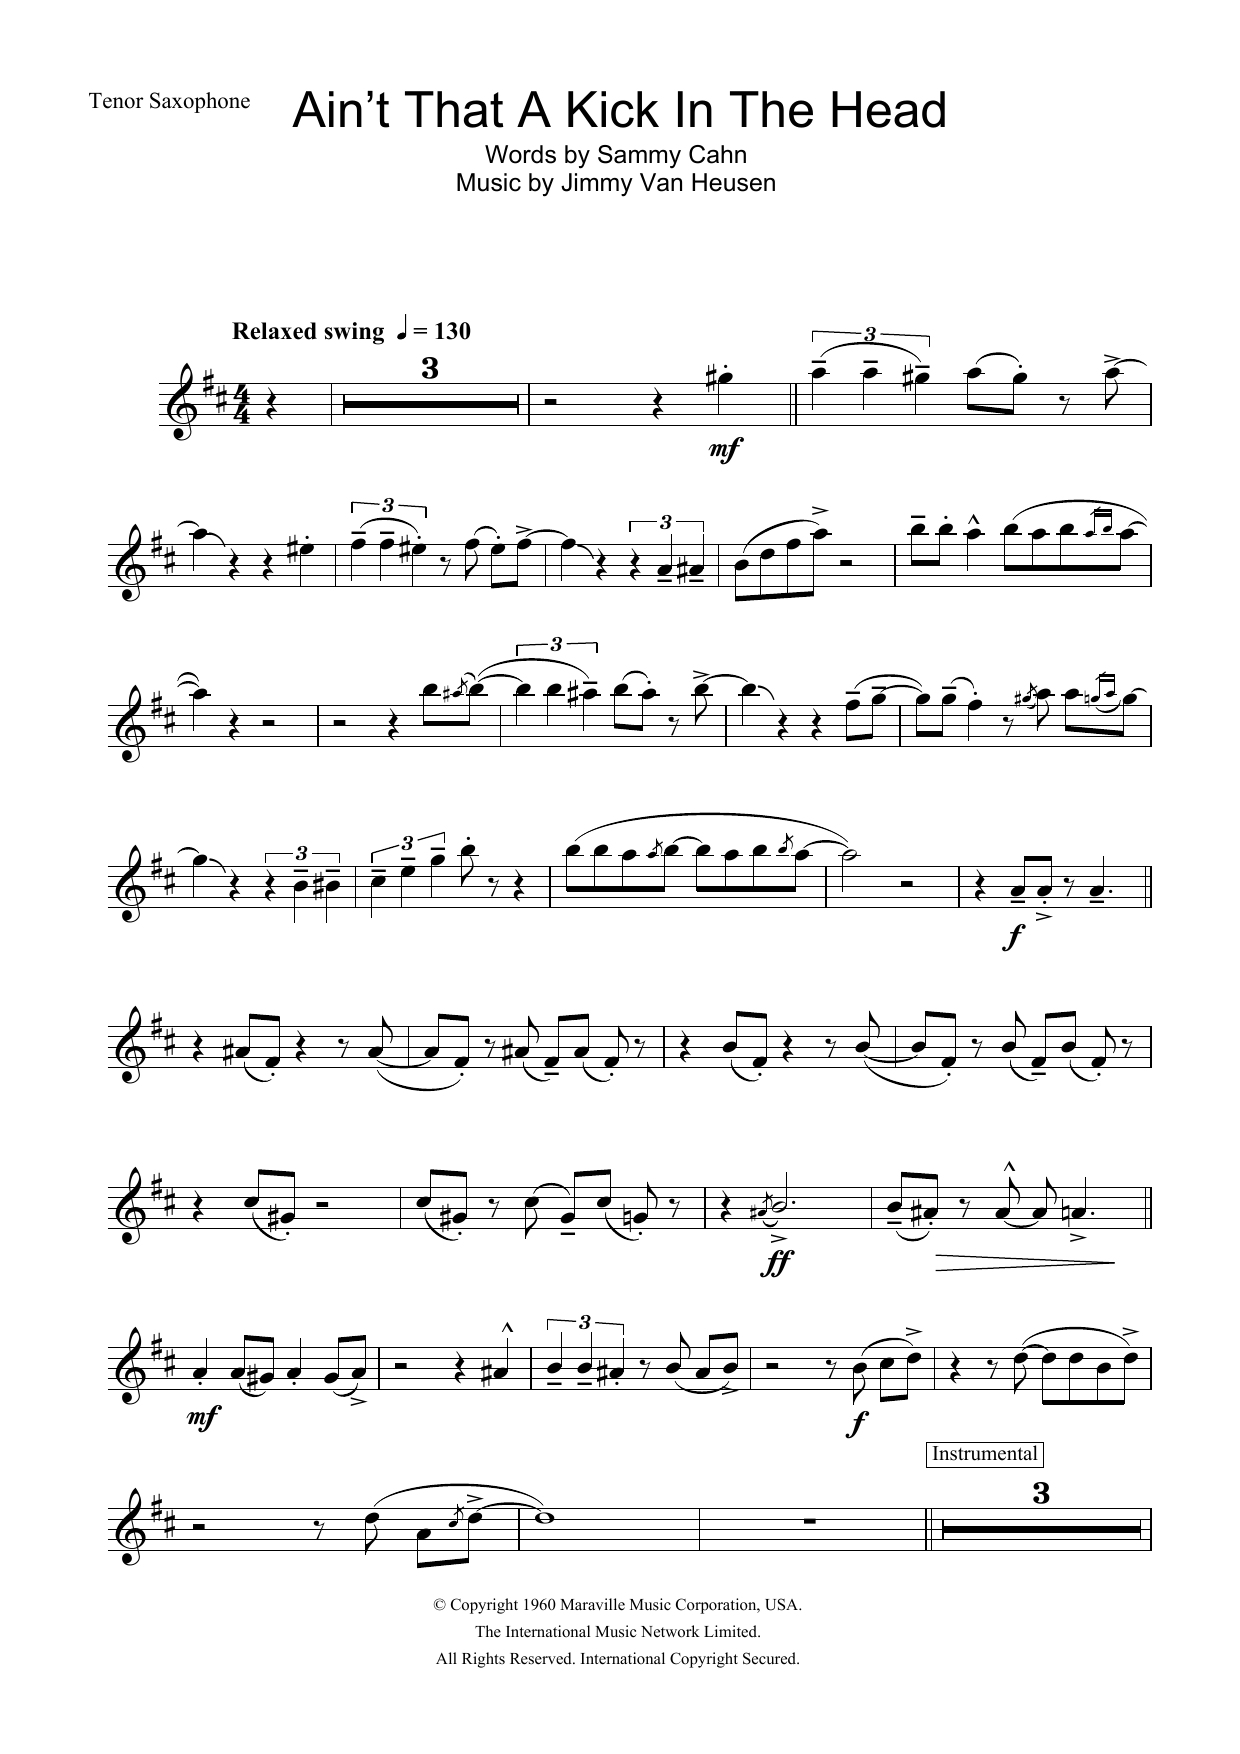 Frank Sinatra Ain't That A Kick In The Head sheet music notes and chords. Download Printable PDF.